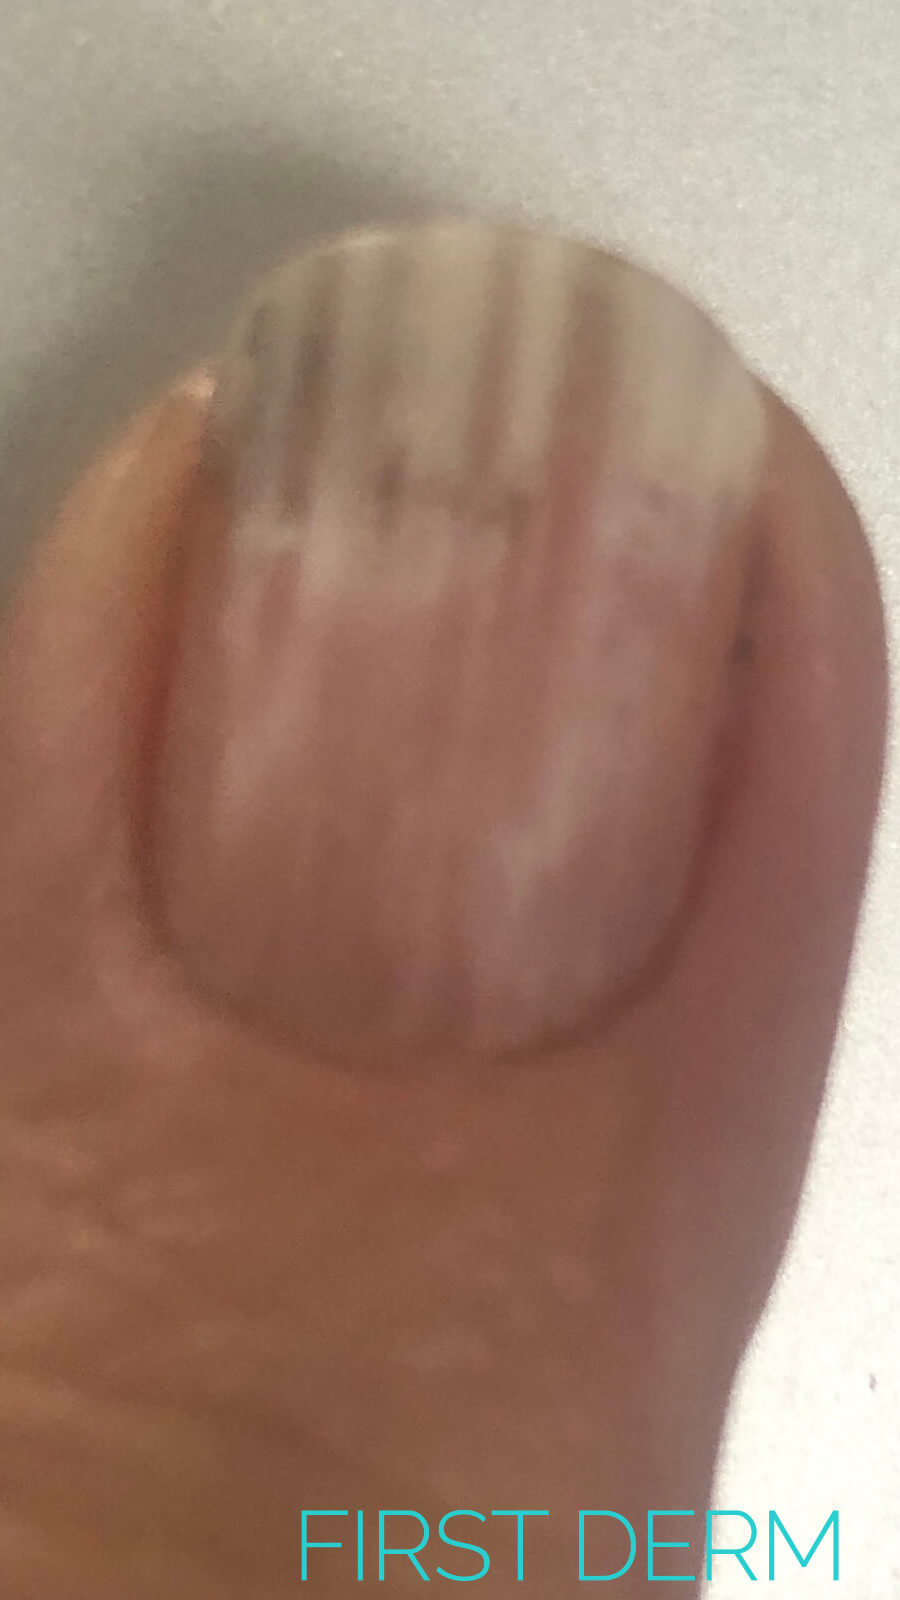 White Spots on Nails - What does it mean?